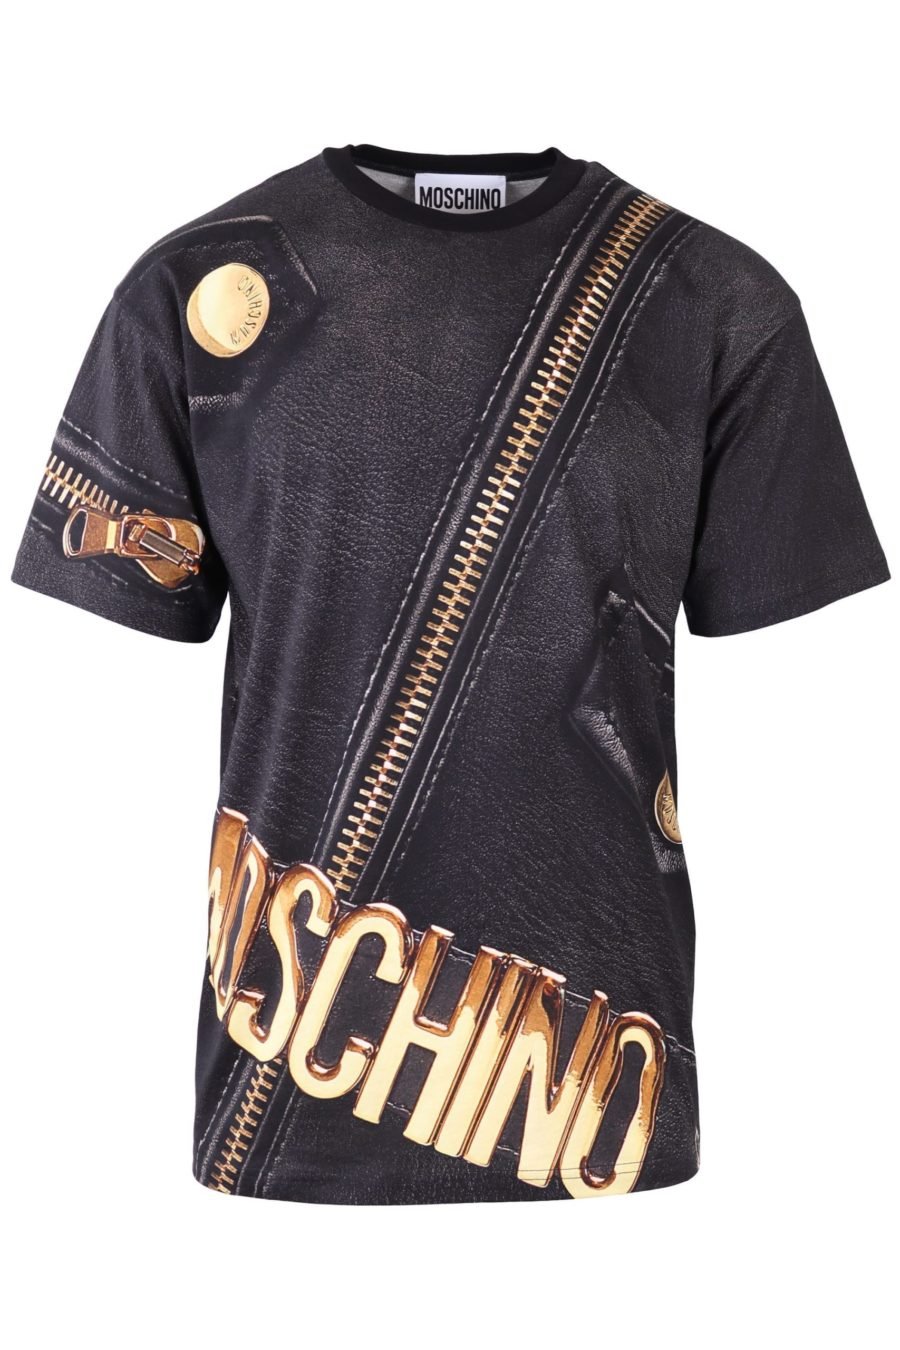 T-shirt Moschino Couture black with gold zip - IMG 6513 scaled